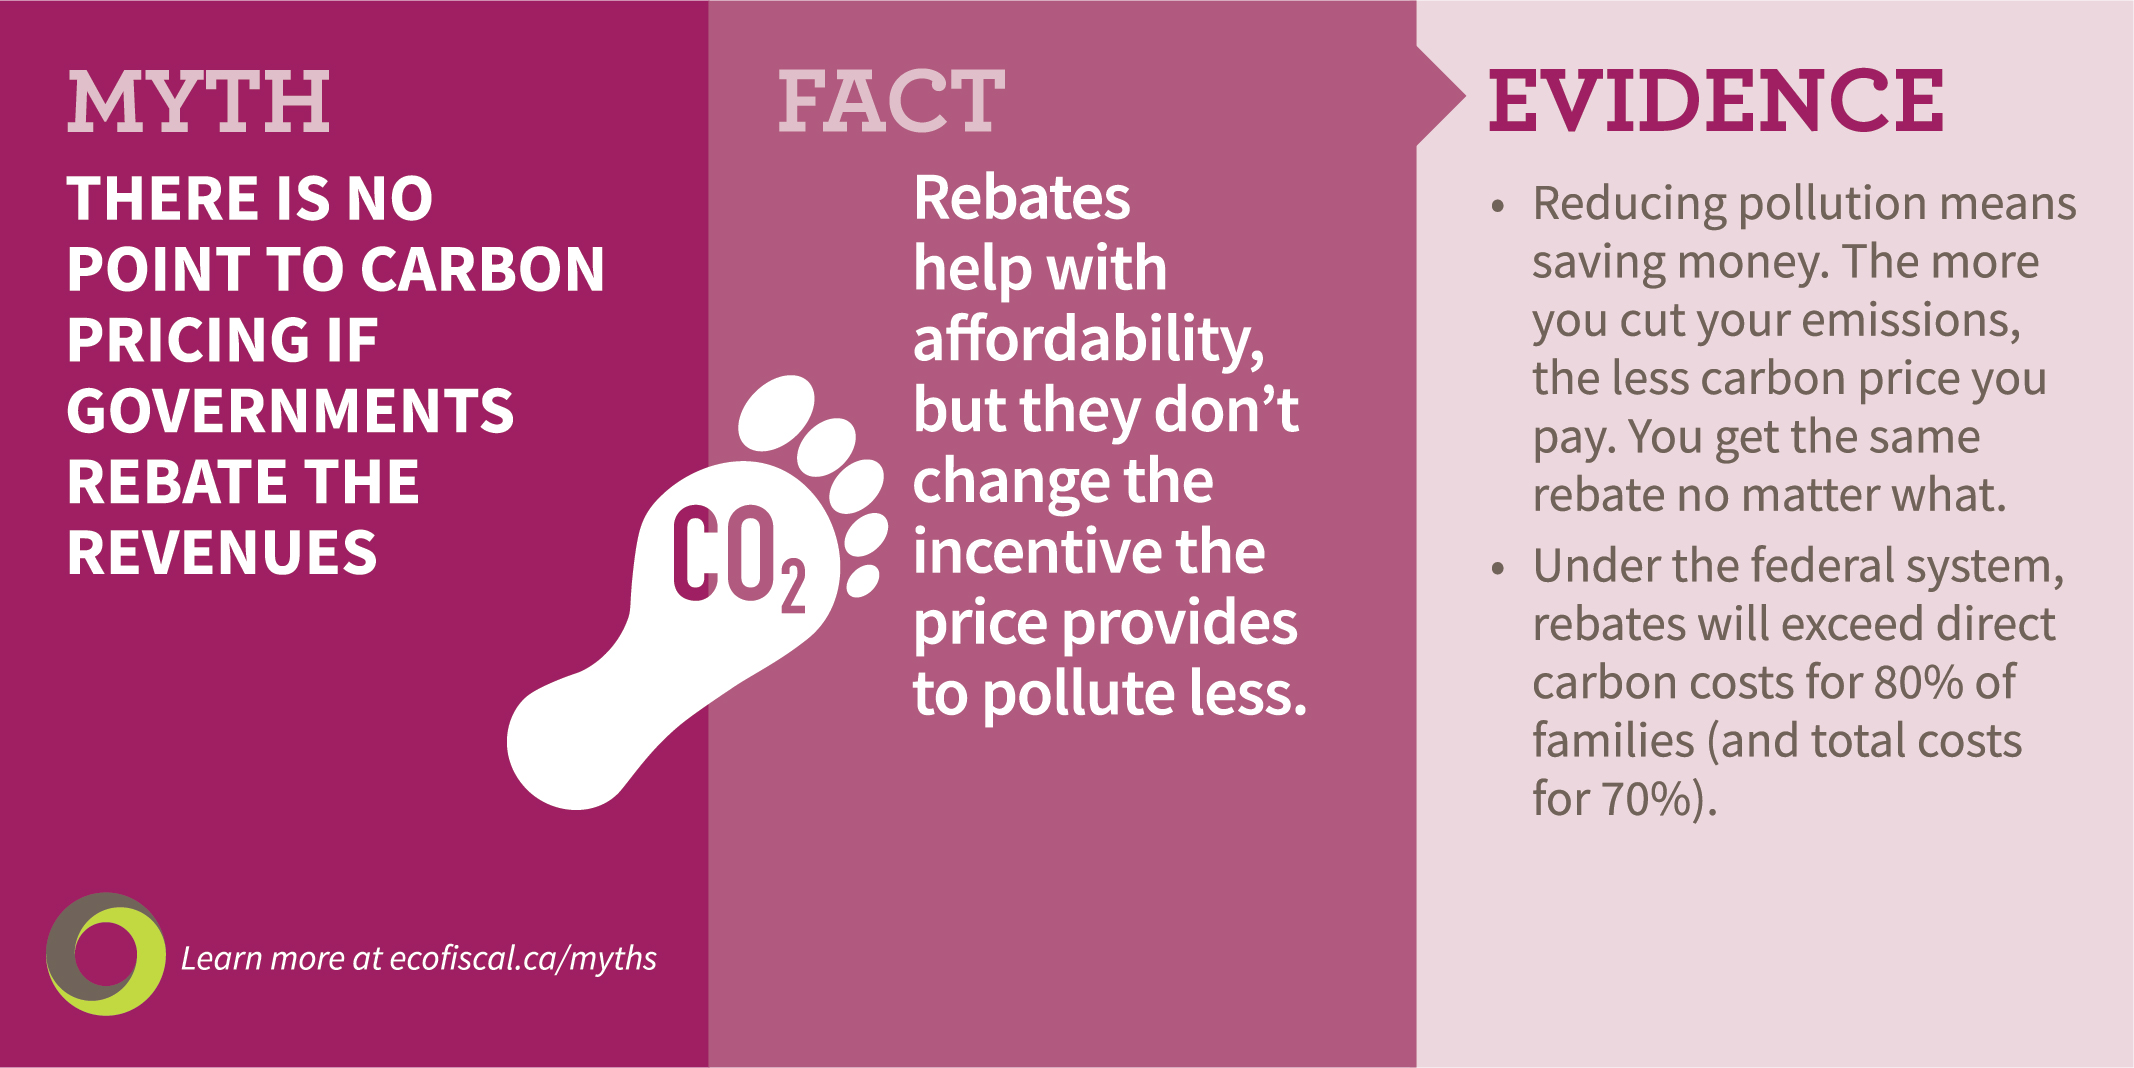 Myth #8: There is no point to carbon pricing if governments rebate the revenues